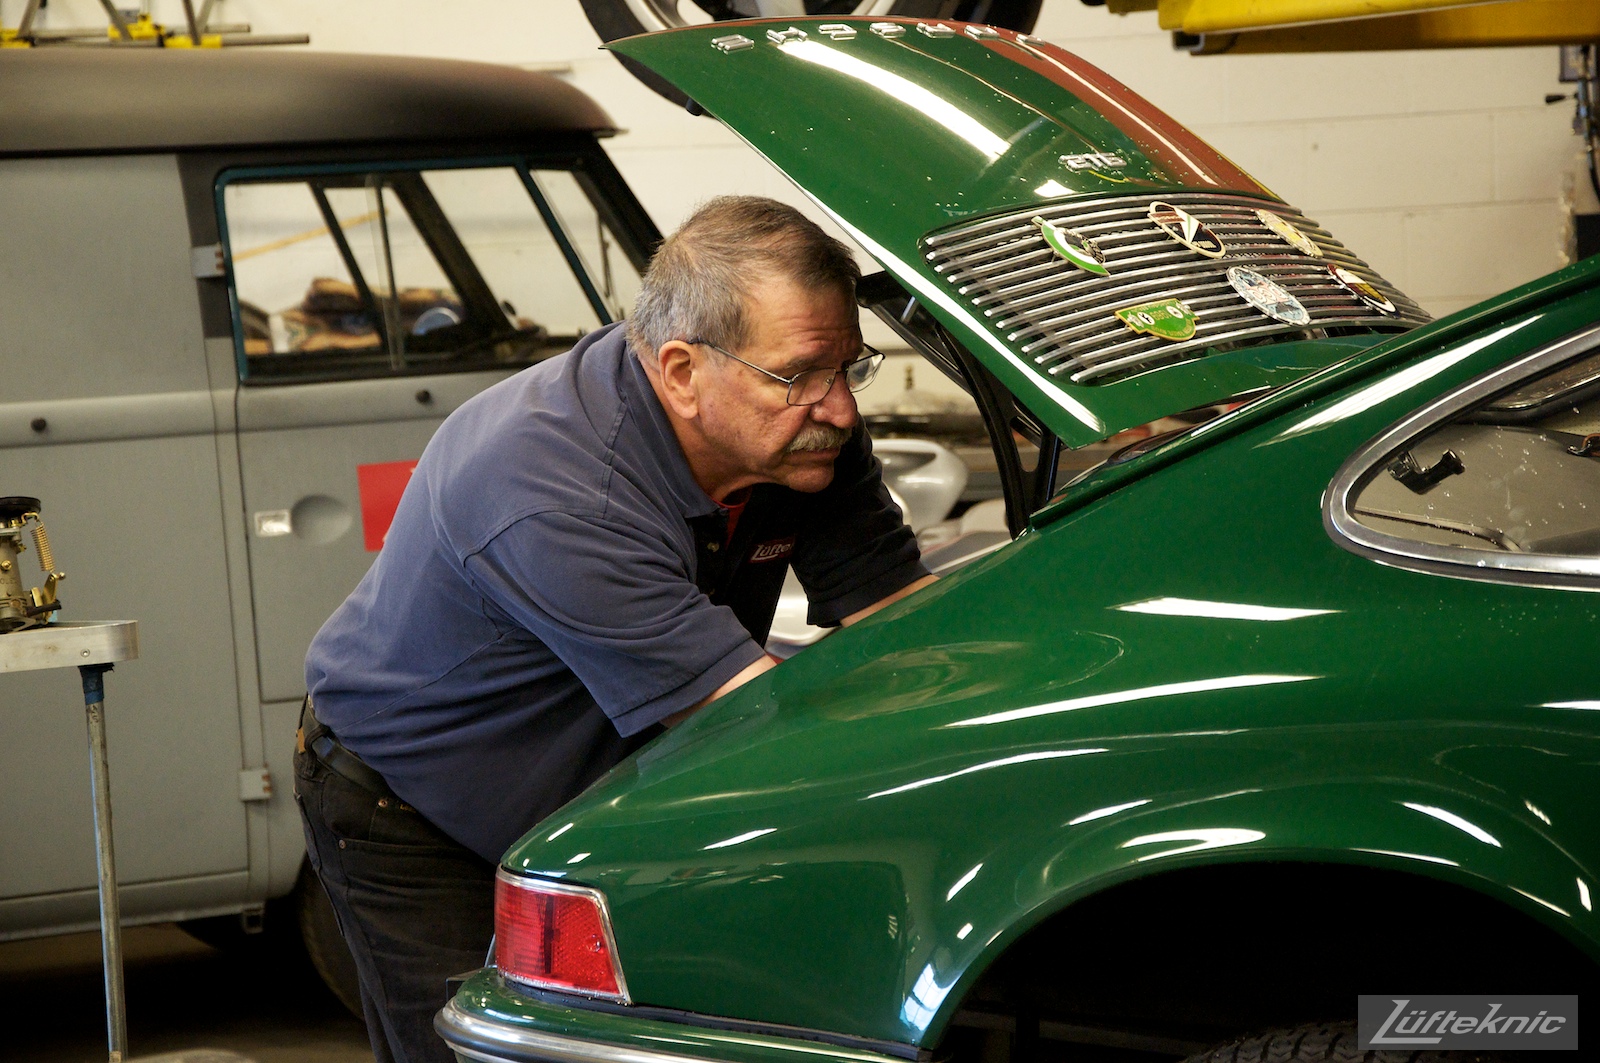 A Lufteknic employee working on the engine in a green Porsche 912.